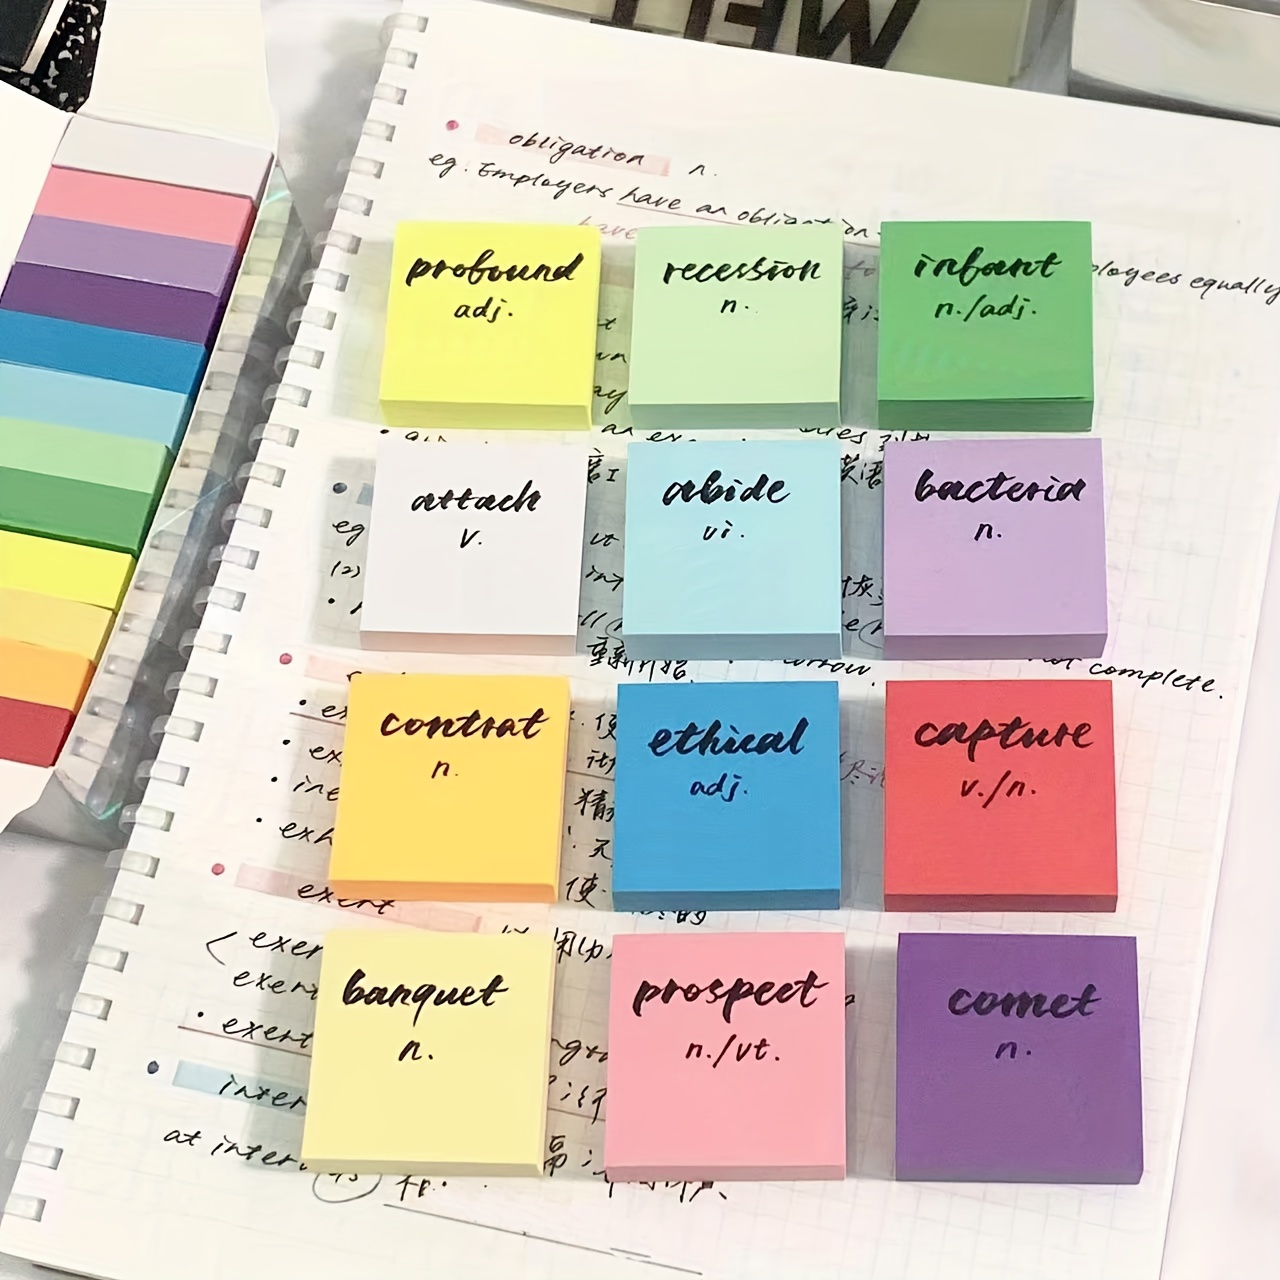 Sticky Notes 3x3 inch Bright Colors Self-Stick Pads 6 Pads/Pack 100  Sheets/Pad Total 600 Sheets